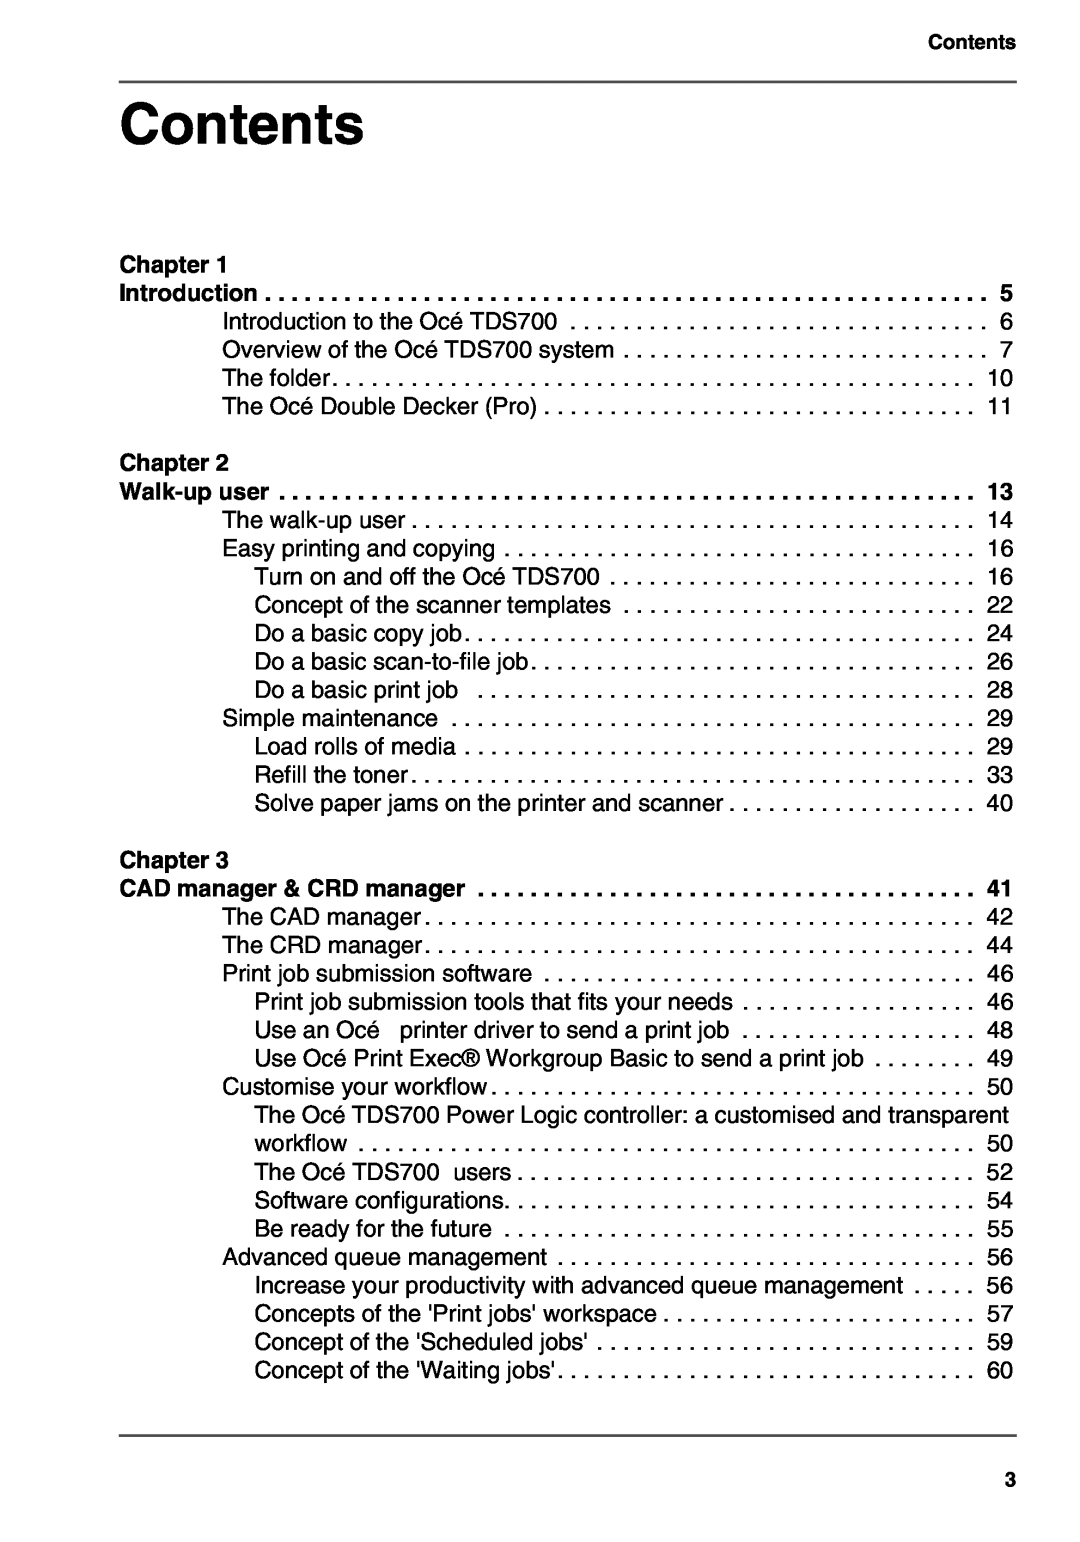 Oce North America TDS700 user manual Contents, Chapter 